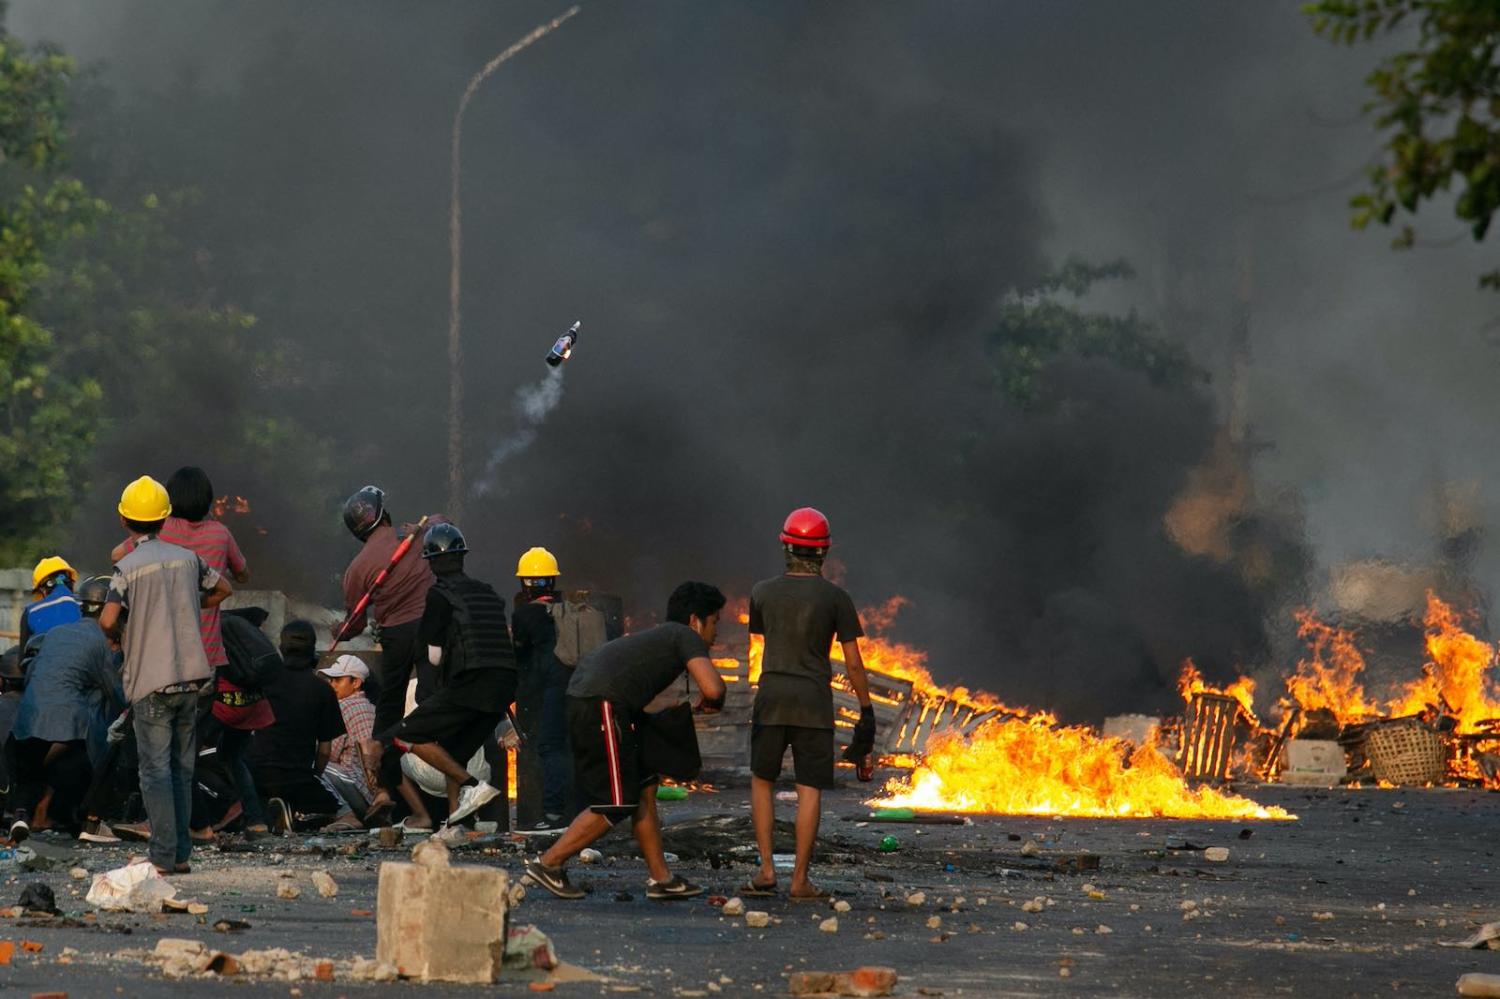 A protester throws a petrol bomb as others take cover behind homemade shields as they confront the police during a crackdown on demonstrations against the military coup in Yangon on 16 March (STR/AFP via Getty Images)